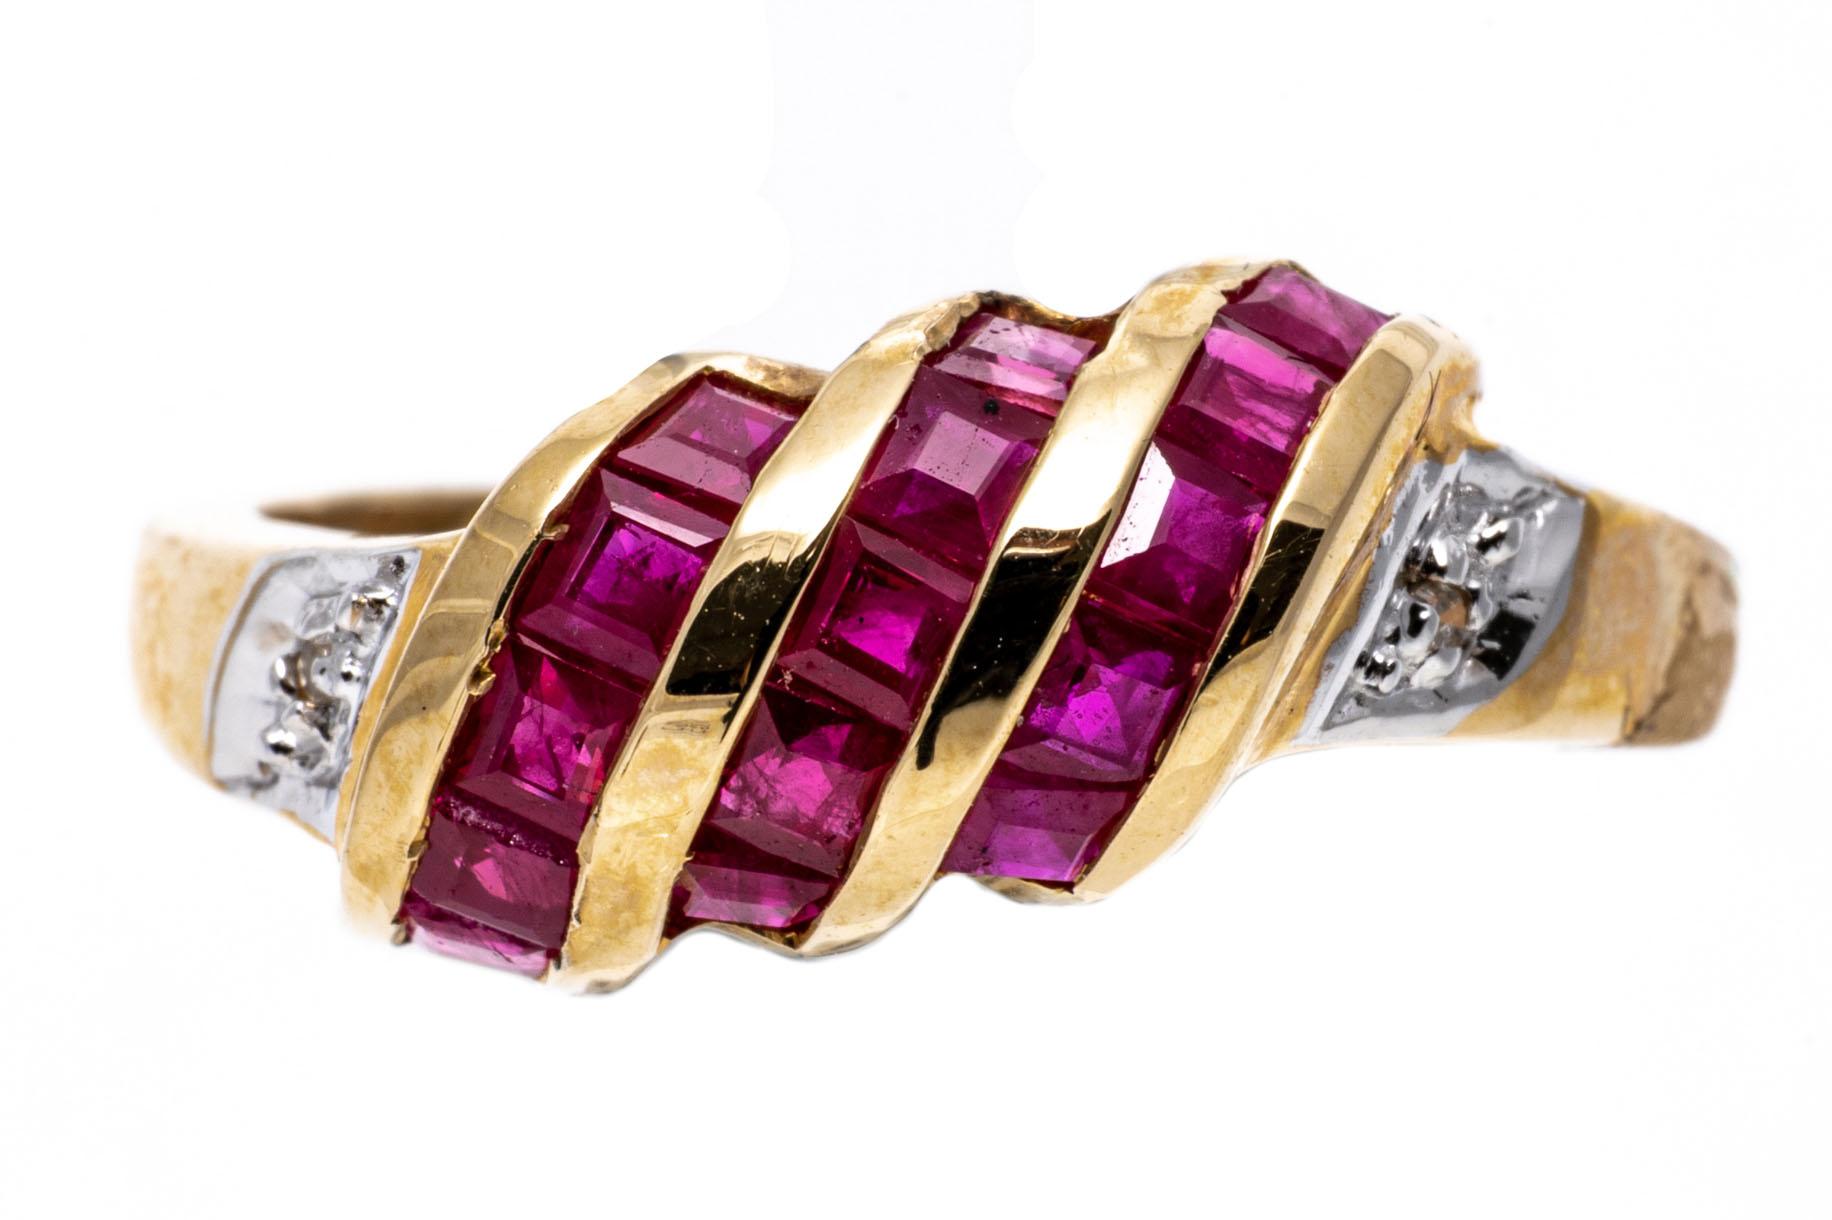 14k yellow gold ring. This pretty yellow gold ring is a slanted, swirl dome style, set with three rows of square faceted, dark pinkish red color rubies, approximately 1.05 TCW, channel set, flanked by round faceted diamonds, approximately 0.005 TCW,